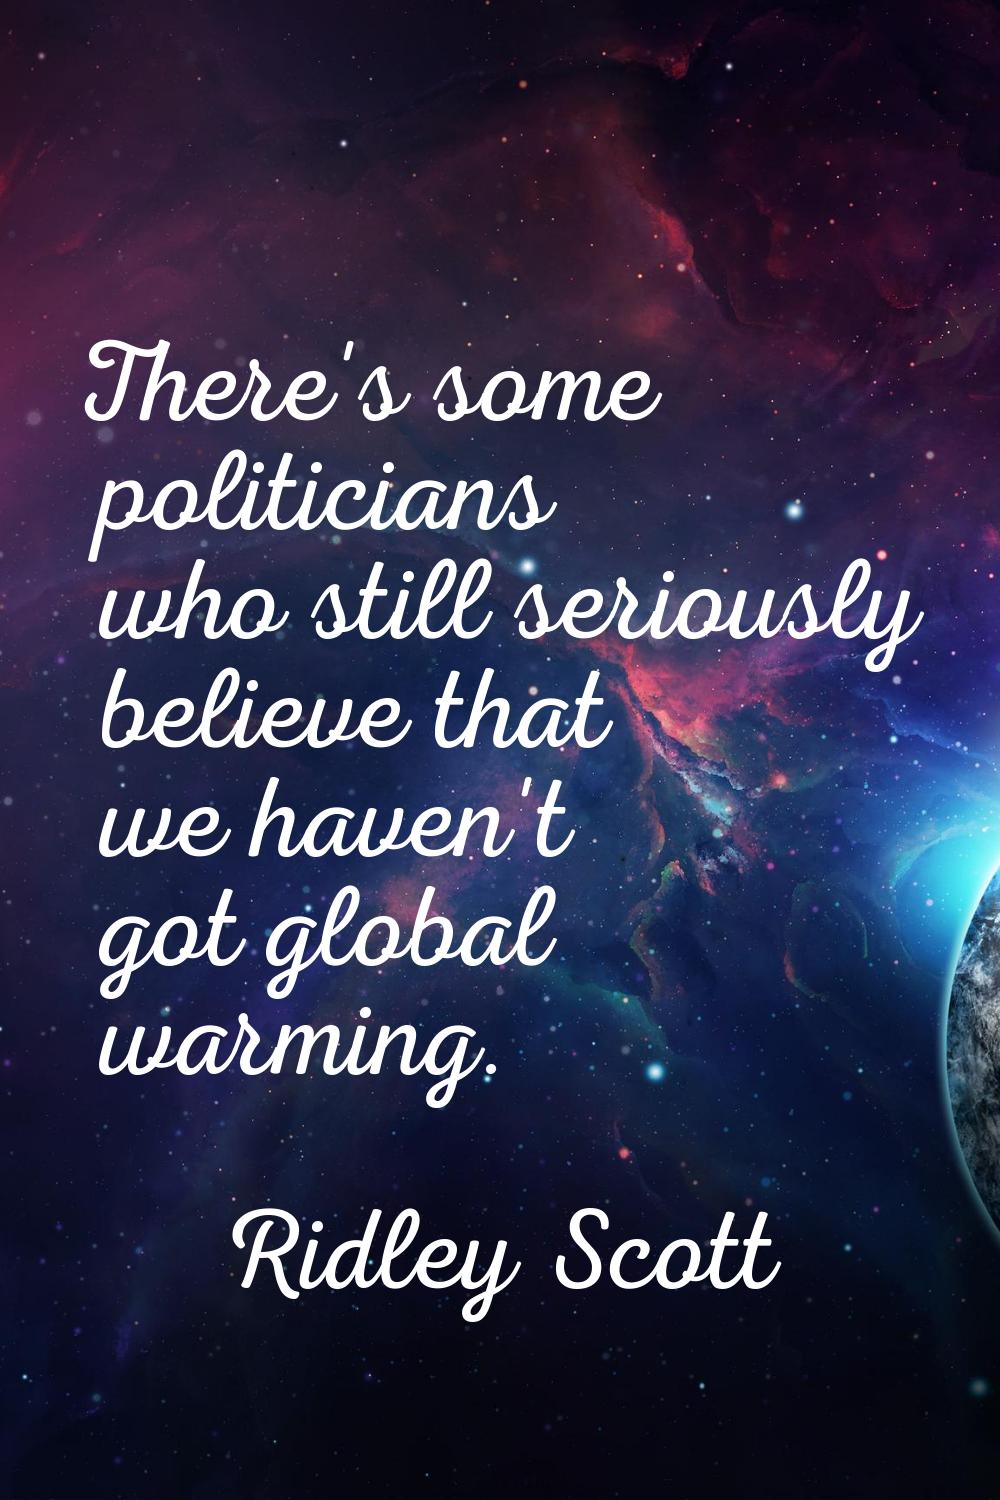 There's some politicians who still seriously believe that we haven't got global warming.